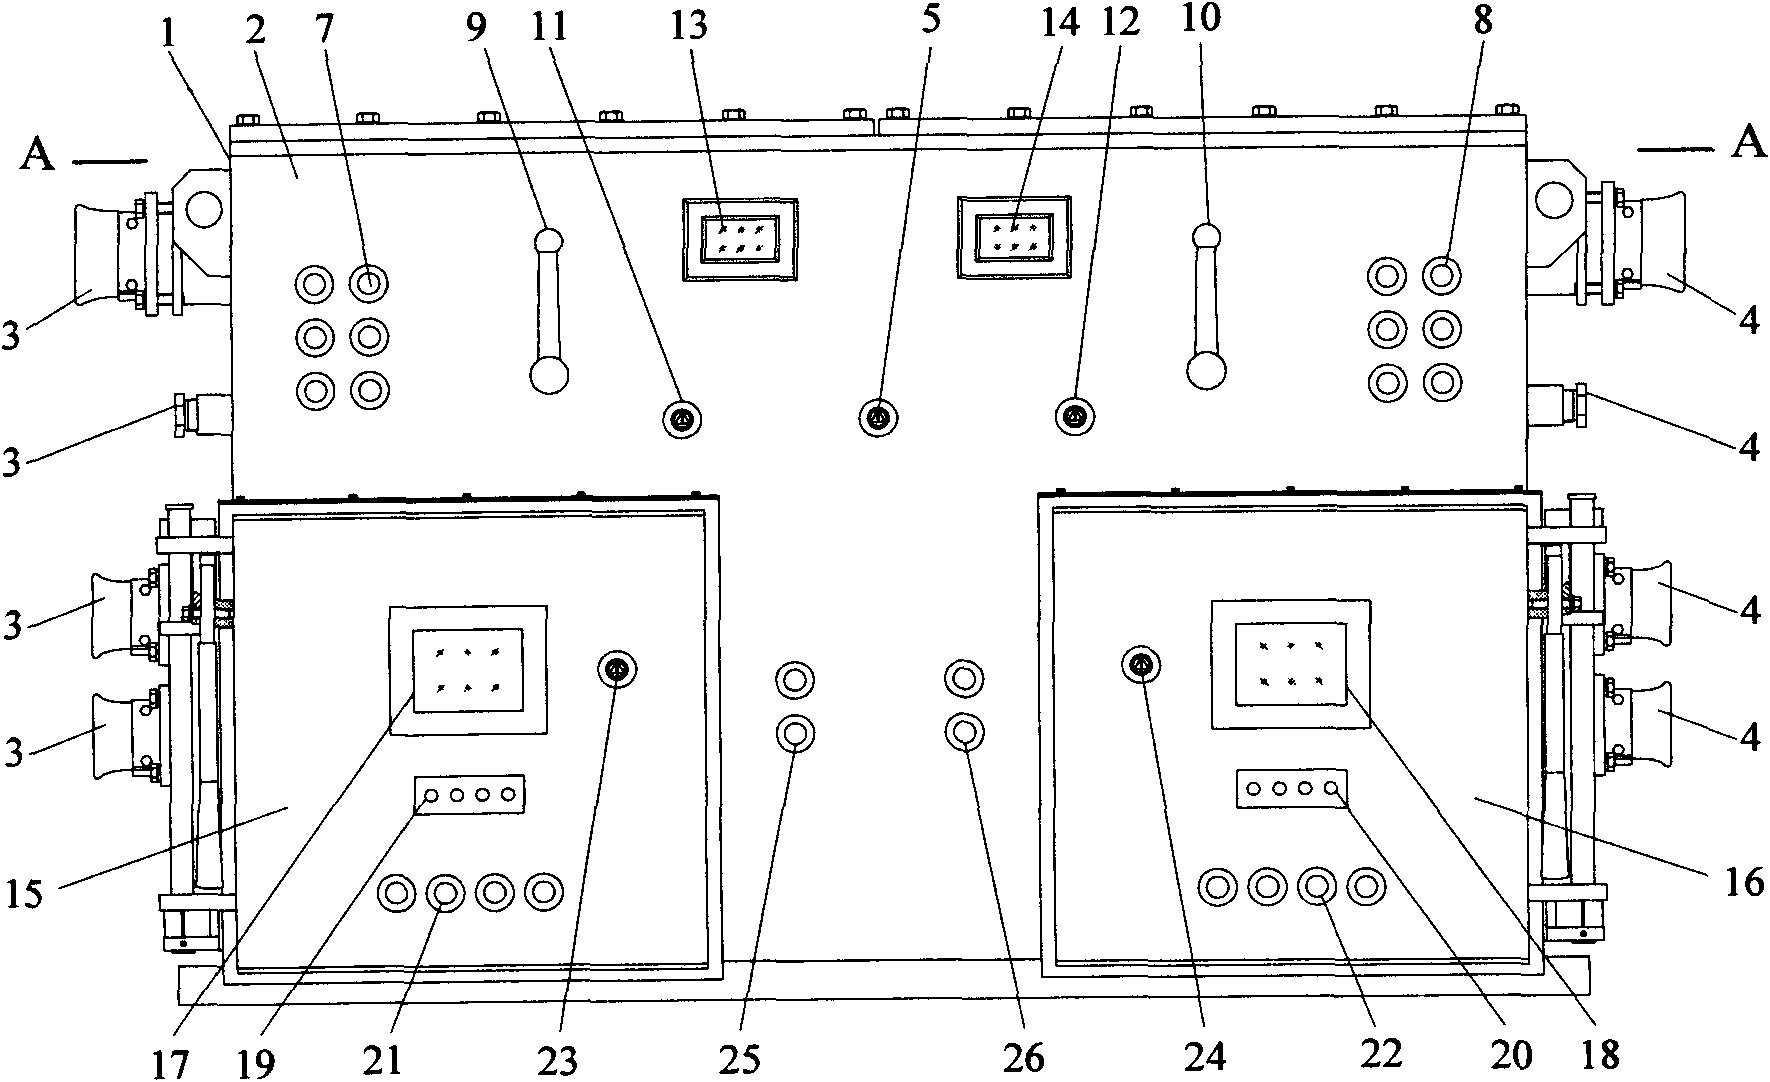 Dual-power dual-fan integrated switch with preferred main power